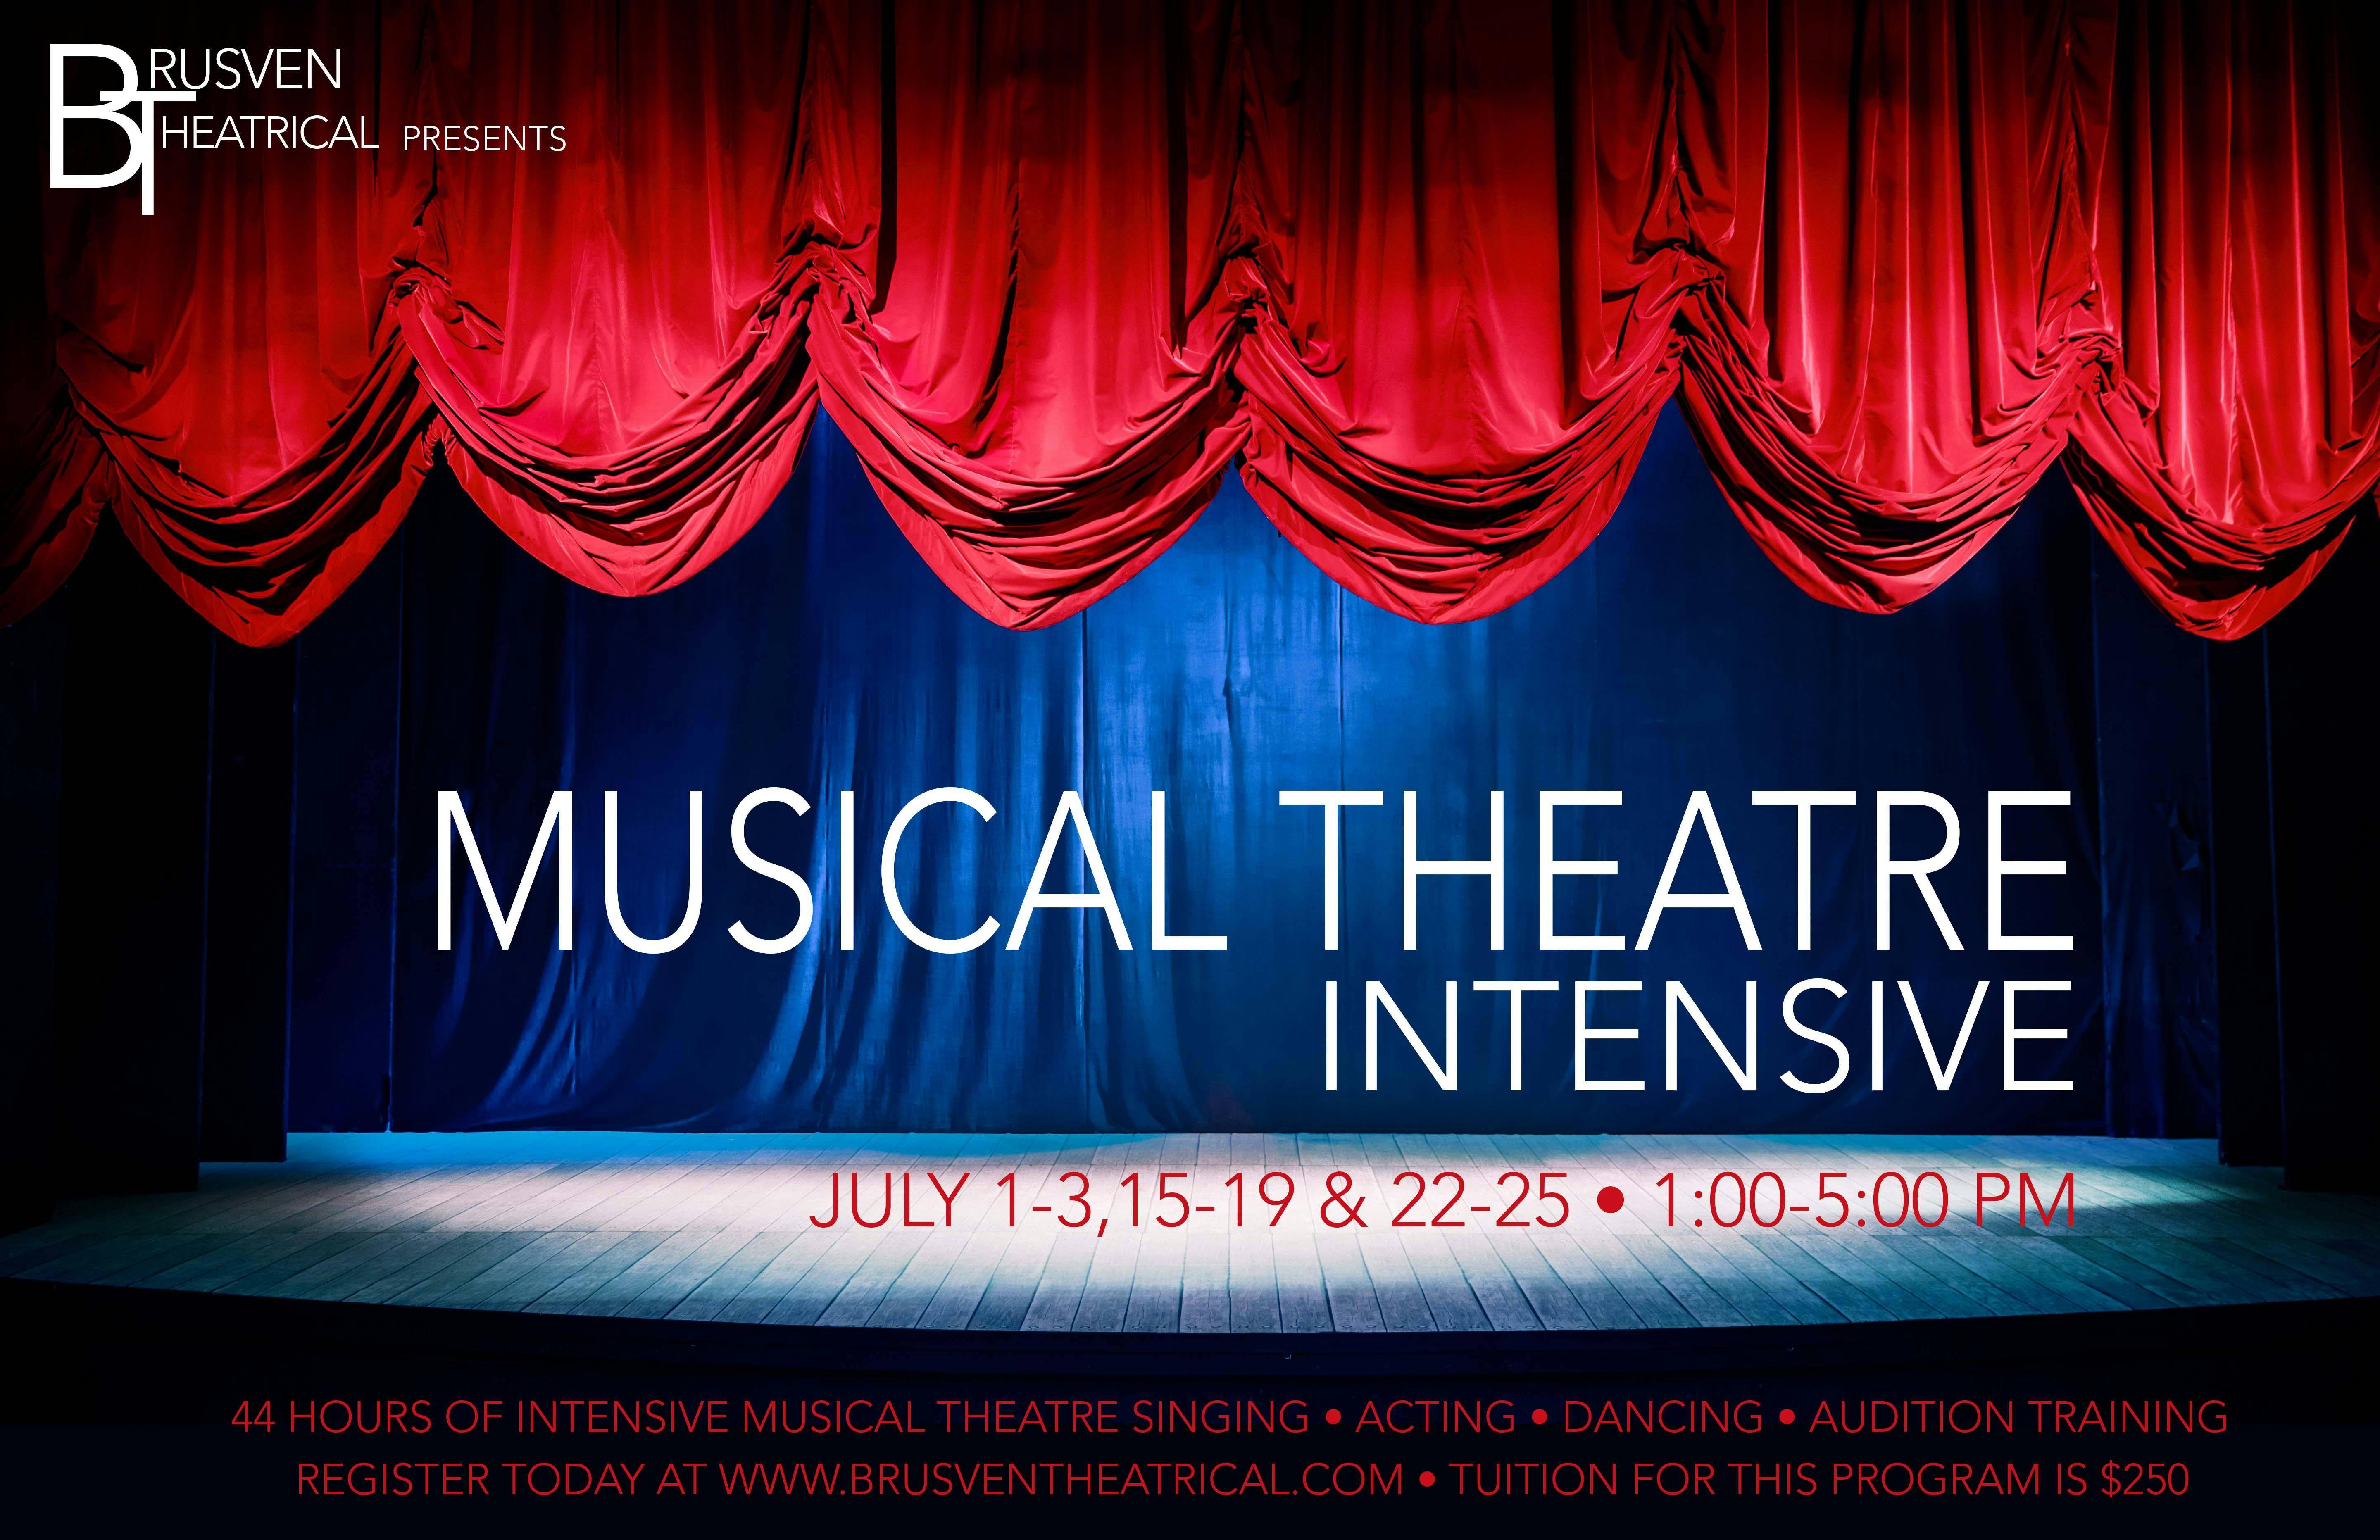 Musical Theatre Intensive by Brusven Theatrical